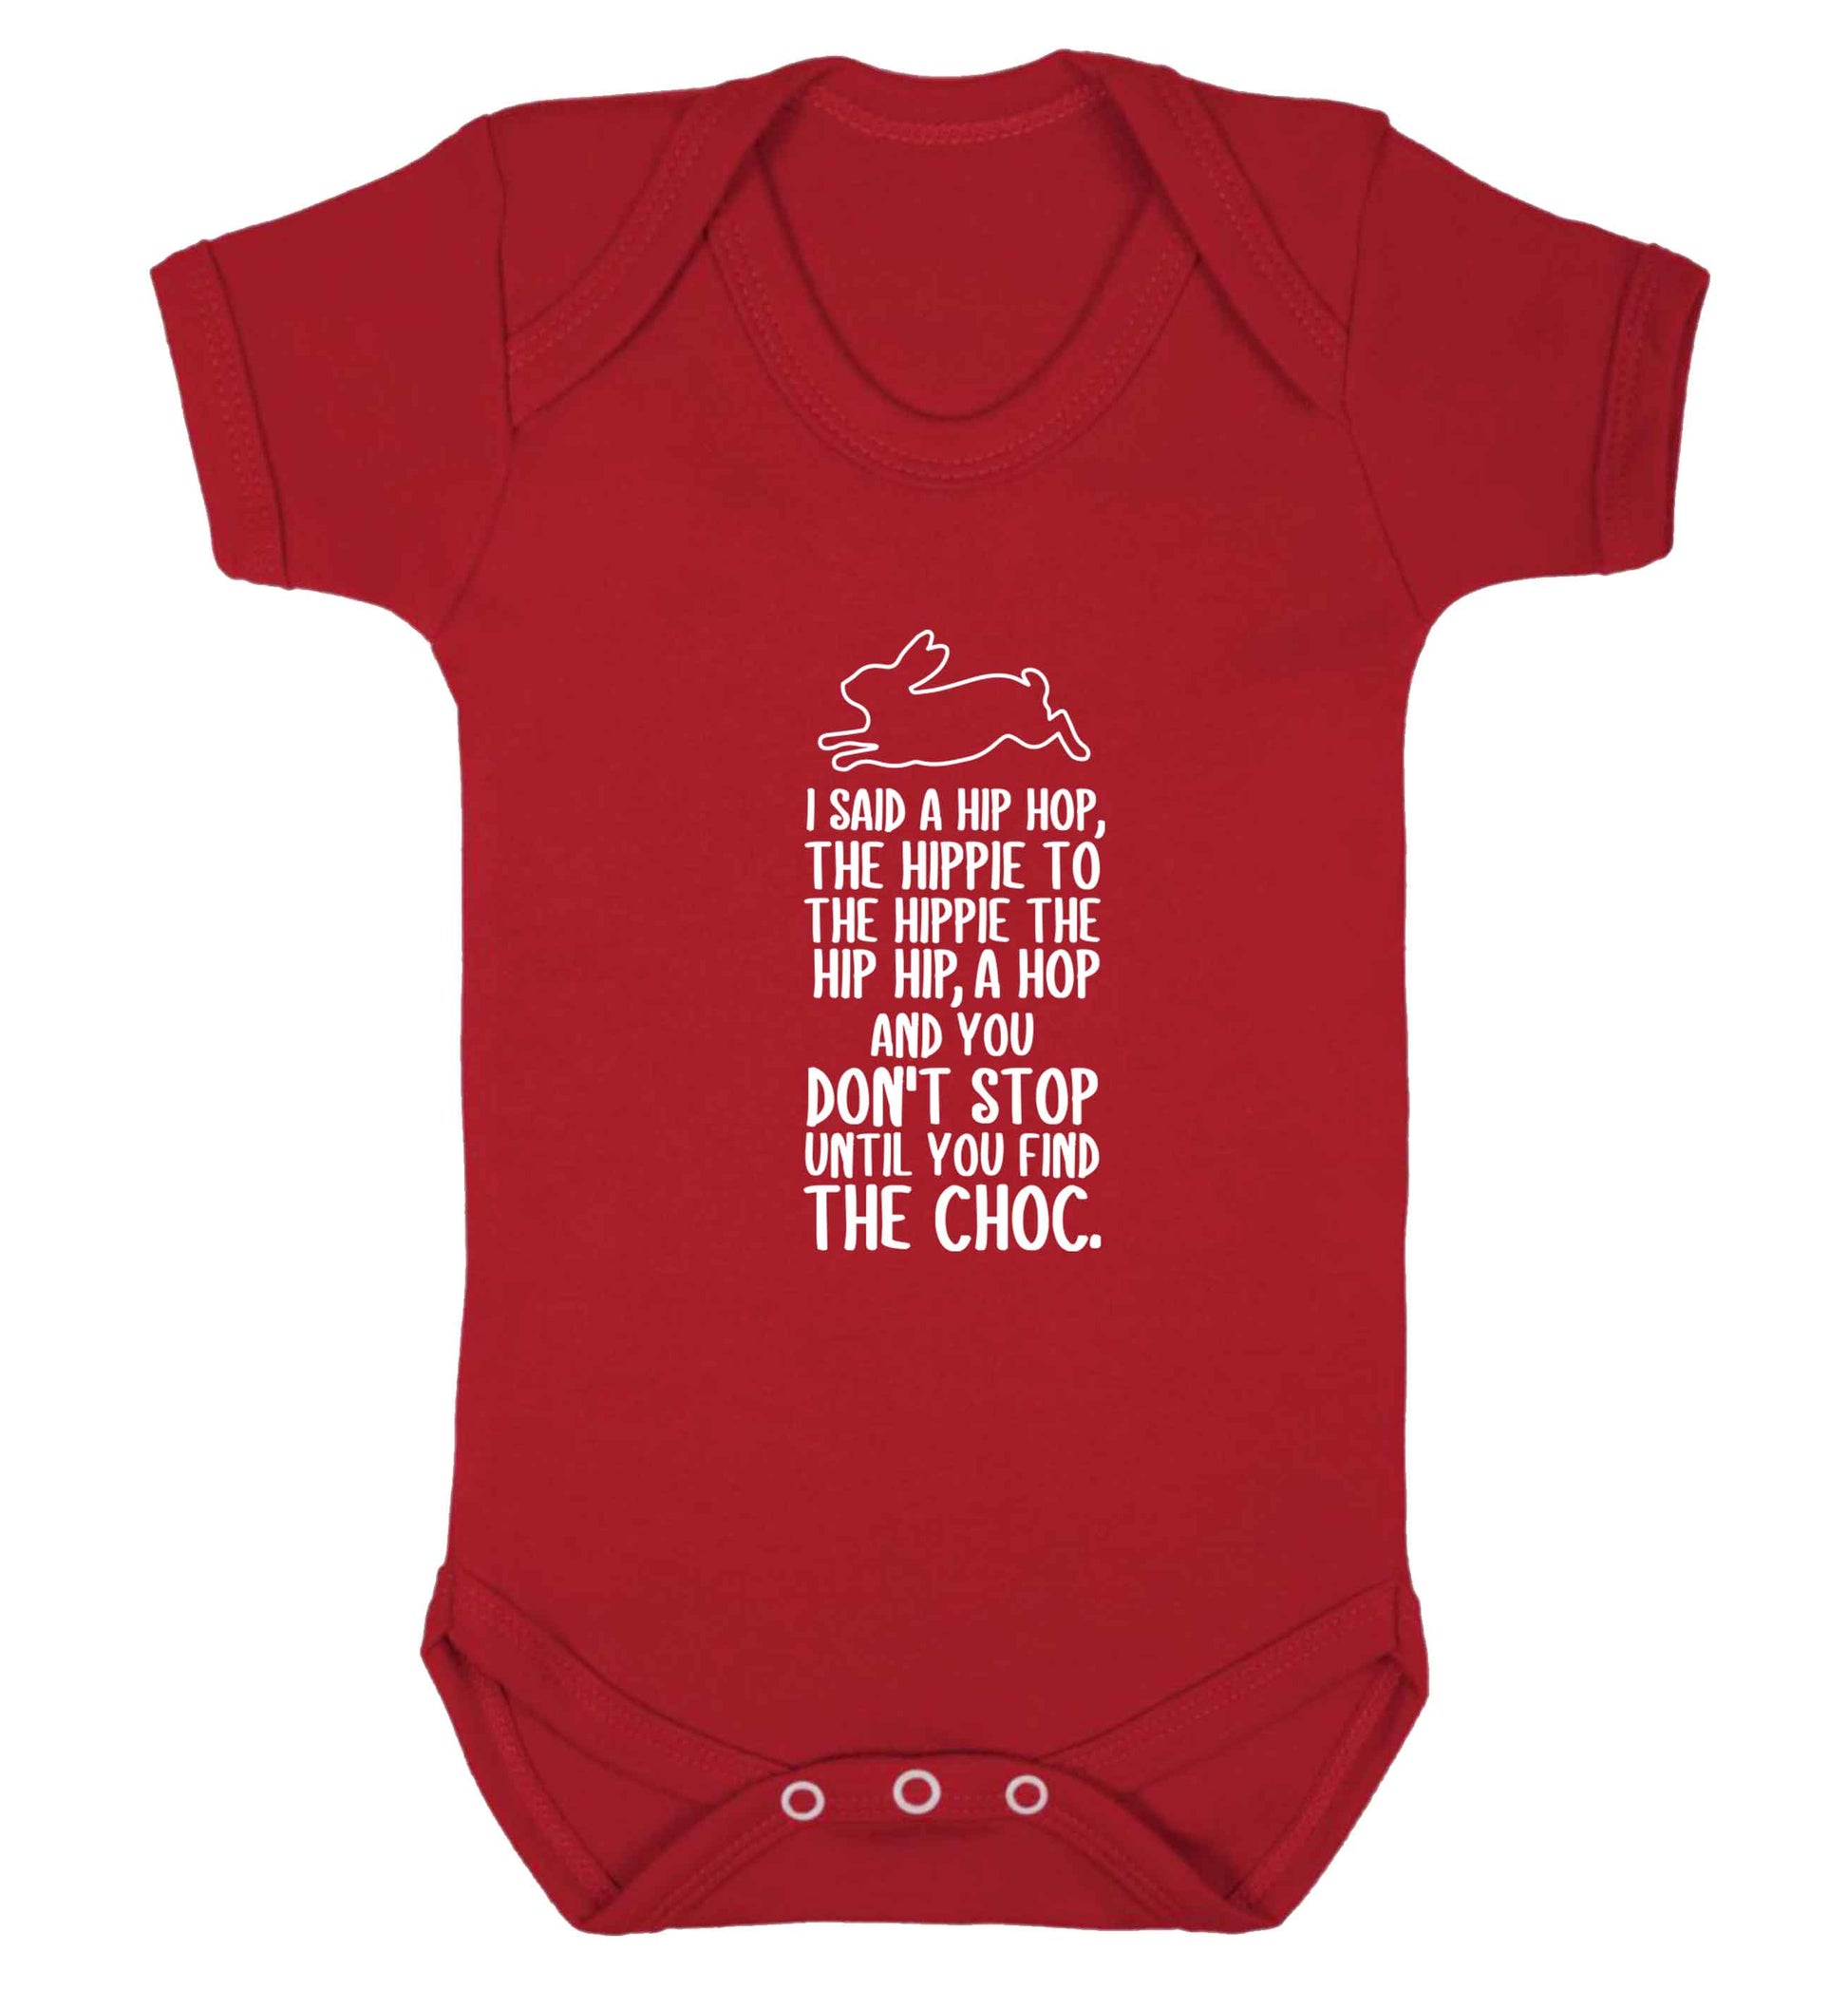 Don't stop until you find the choc baby vest red 18-24 months